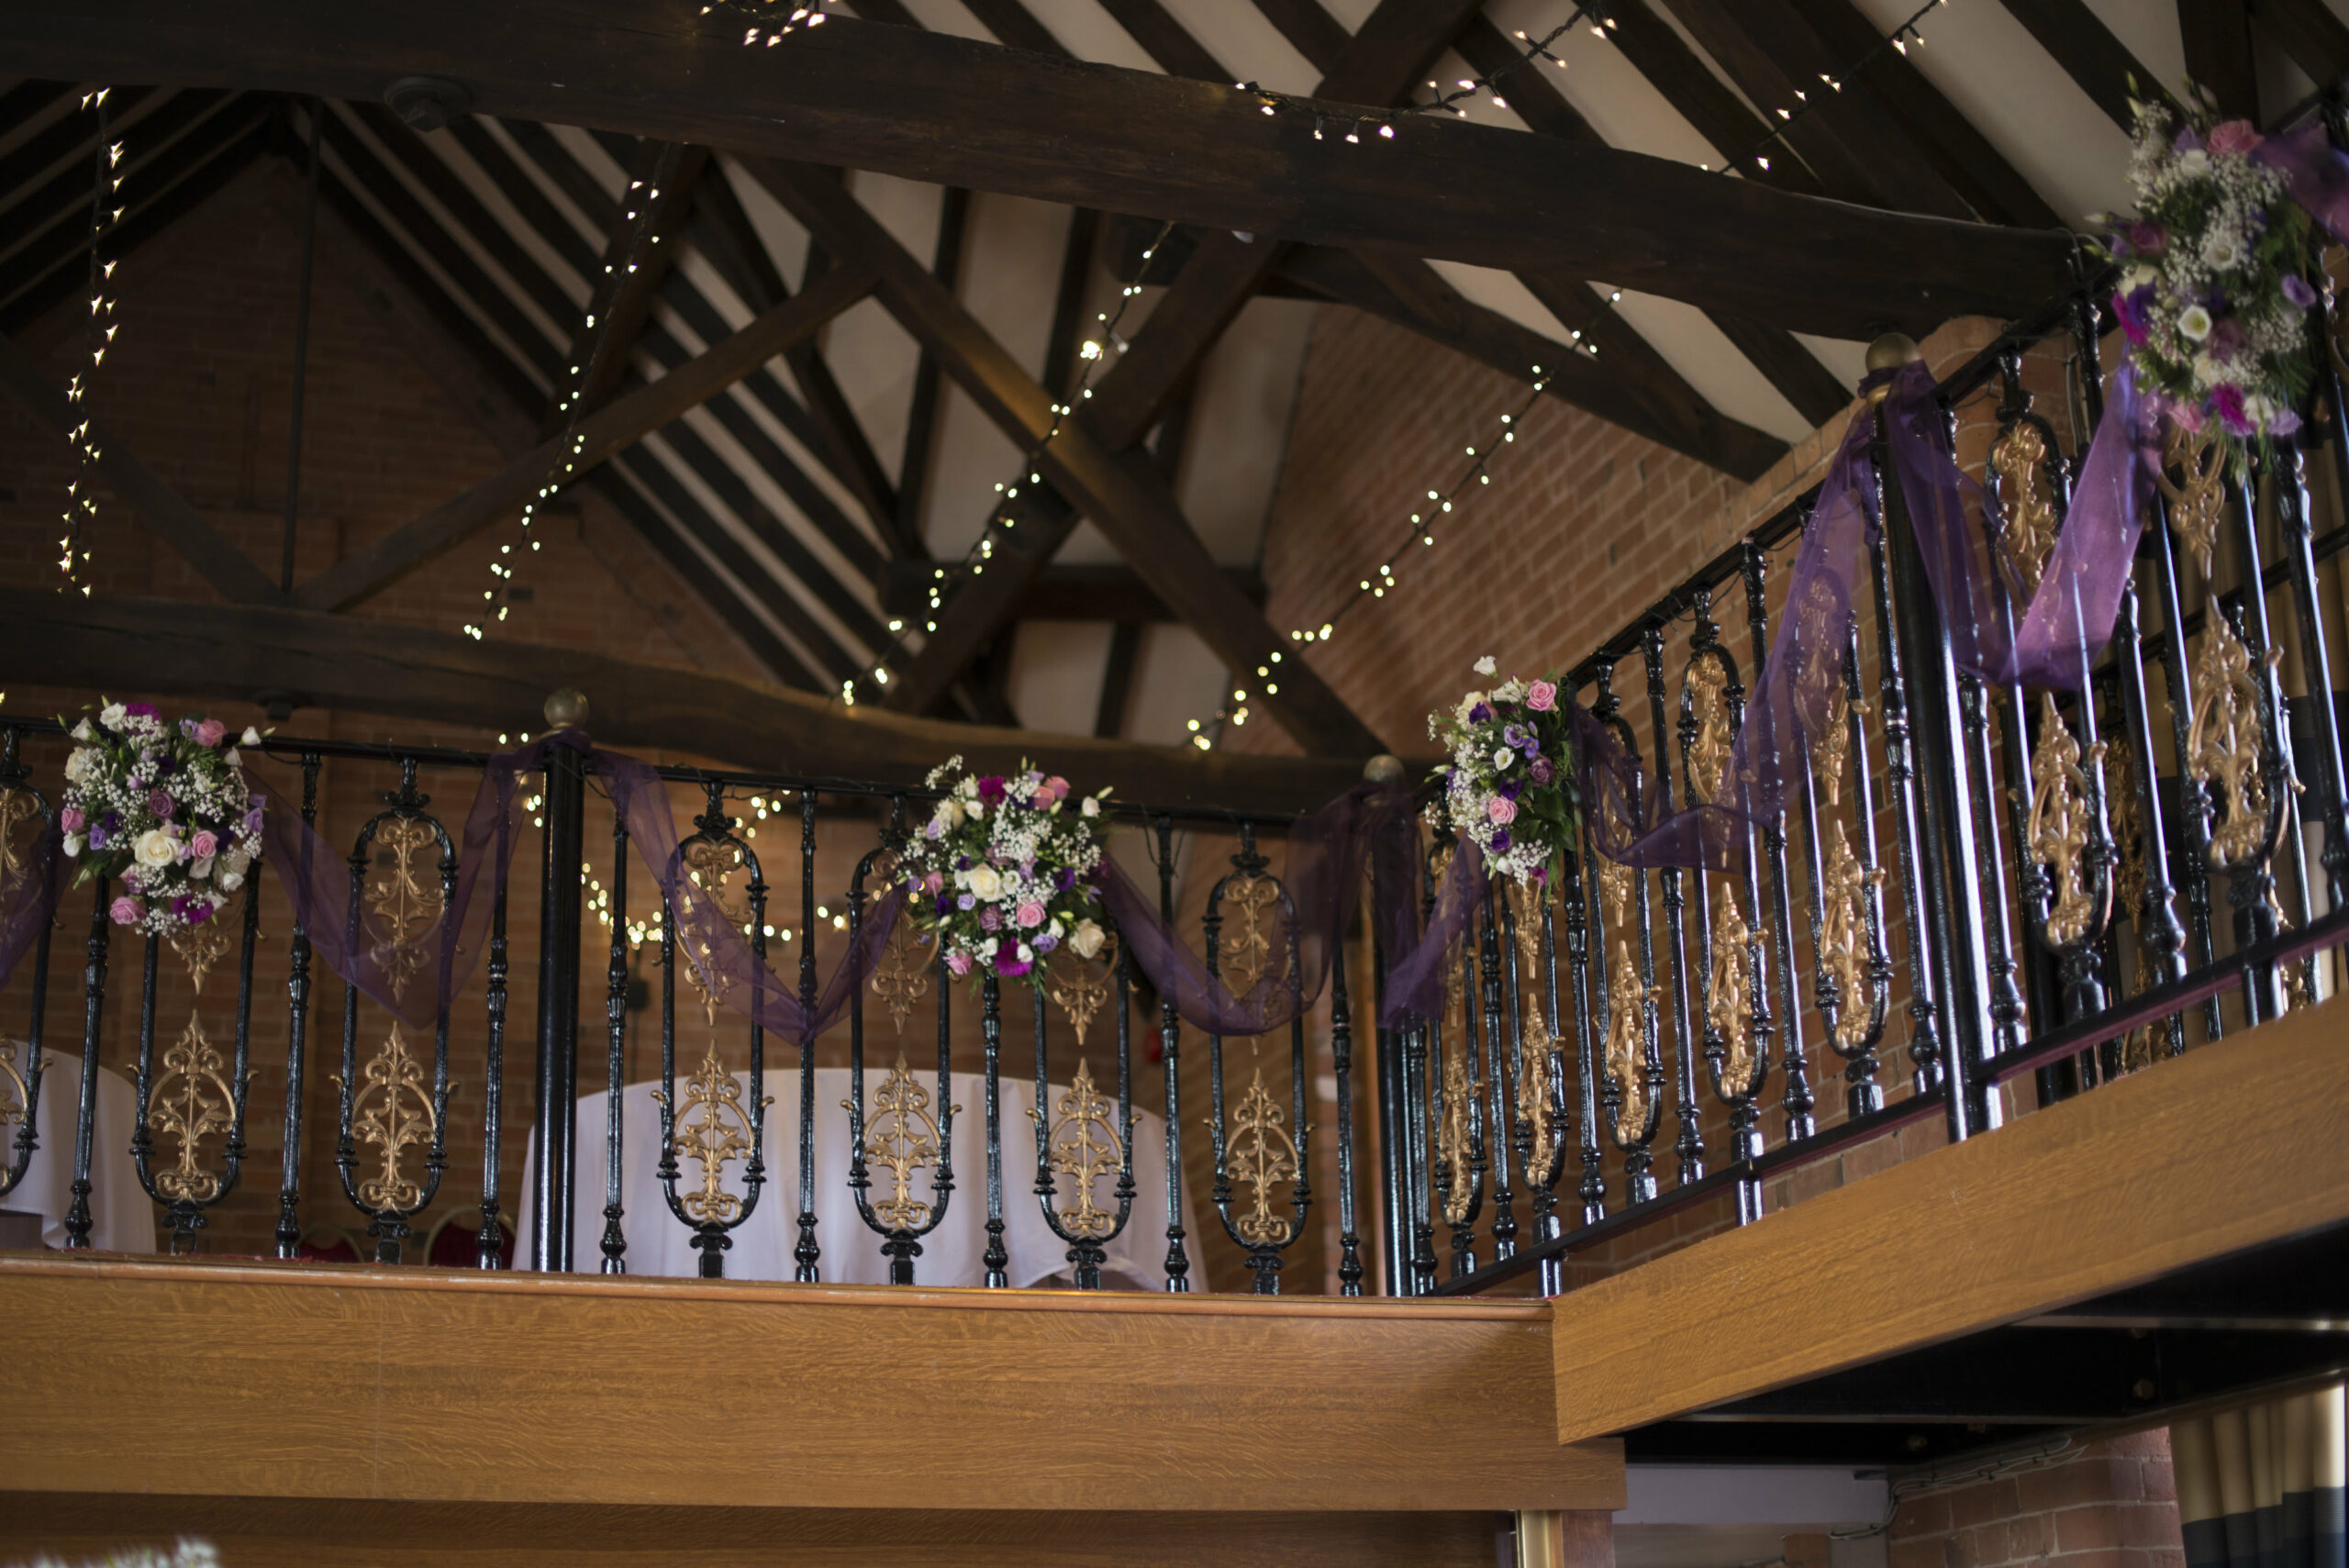 Real Wedding | Purple | Cultural | DIY | Manor House | Golf Club | Autumn | Kayleigh Pope Photography #Bridebook #RealWedding #WeddingIdeas #IngonManor Bridebook.co.uk 